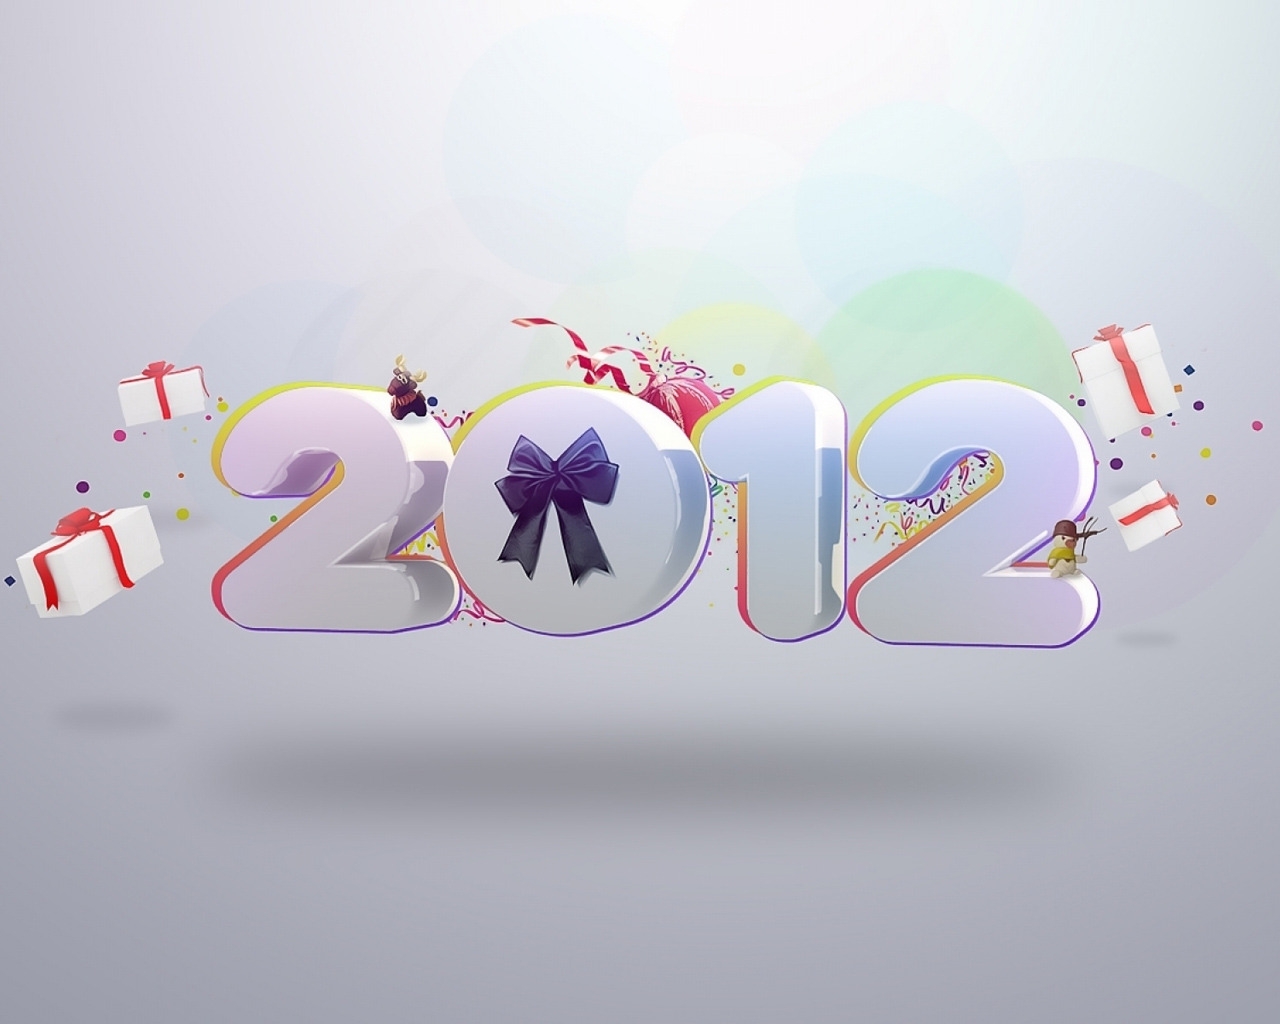 2012 Year Celebration for 1280 x 1024 resolution